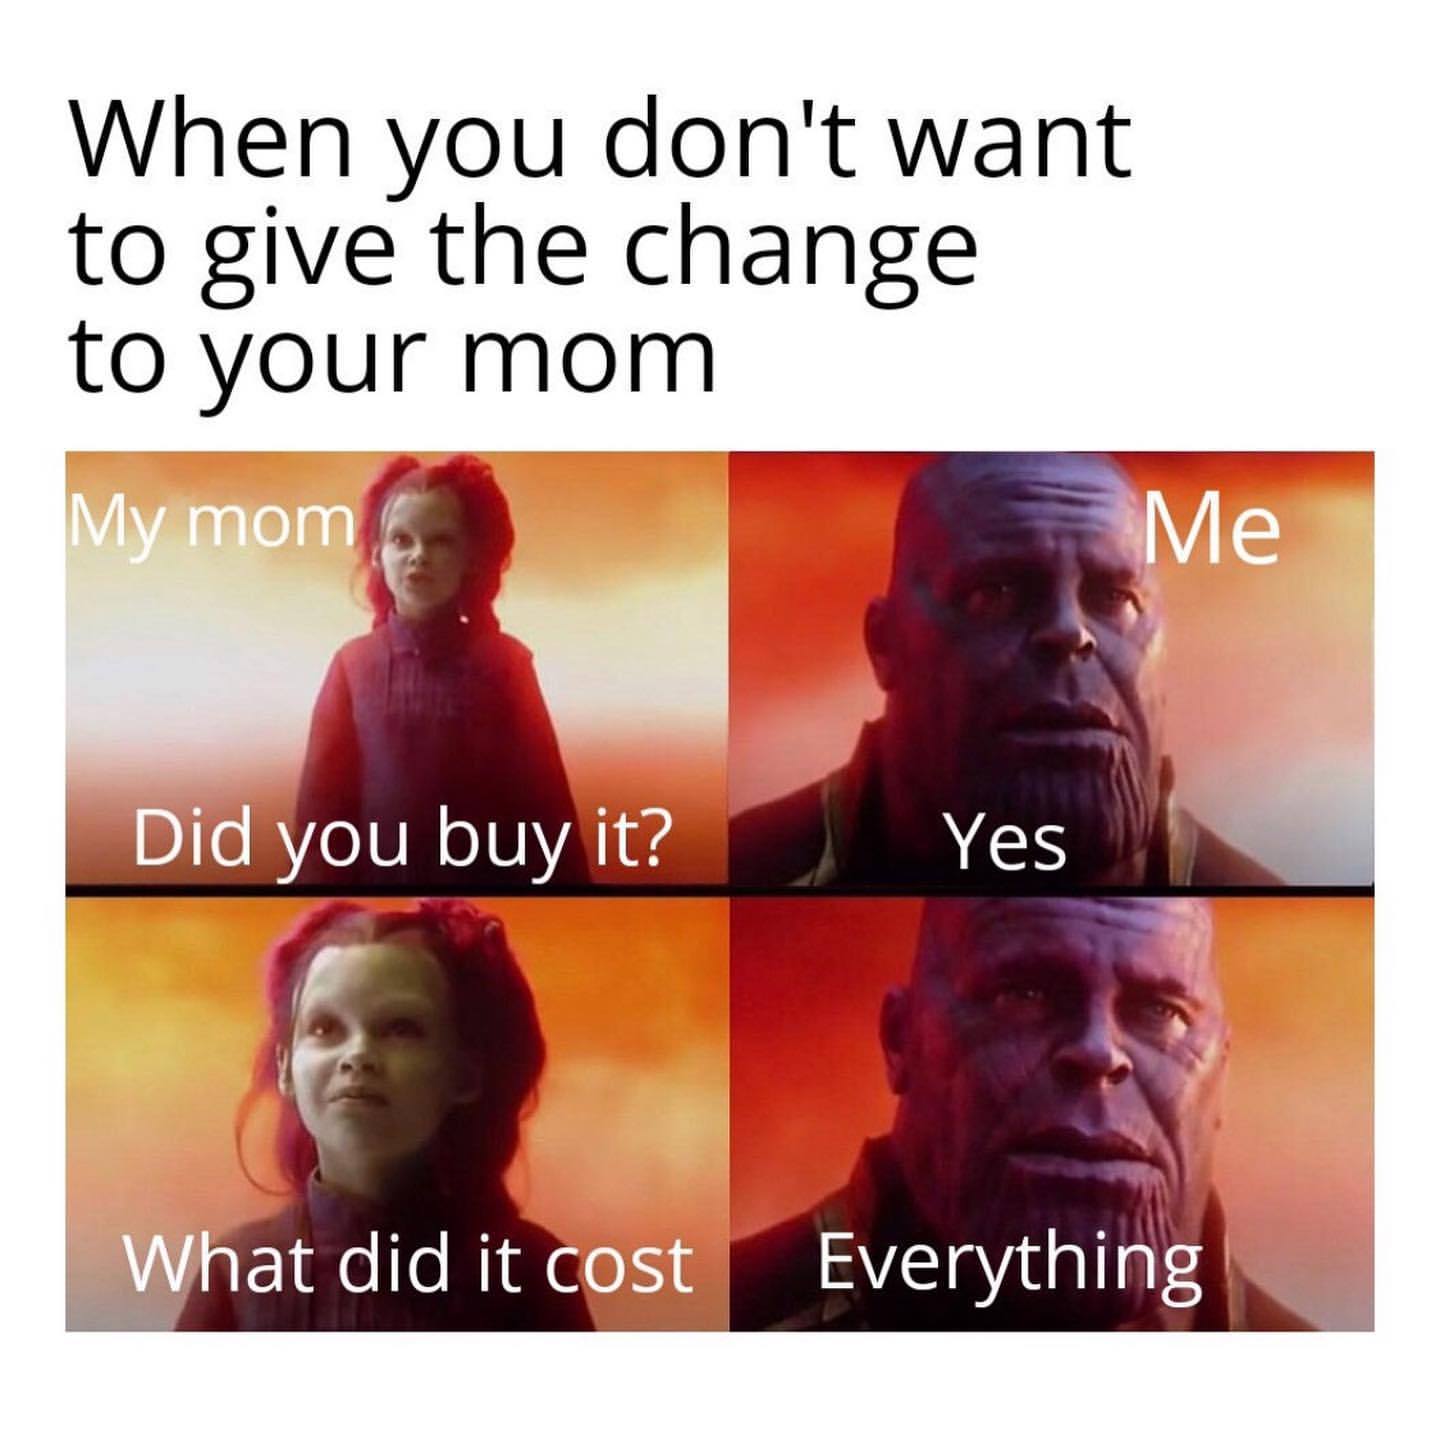 When you don't want to give the change to your mom.  My mom: Did you buy it?  Me: Yes. What did it cost? Everything.